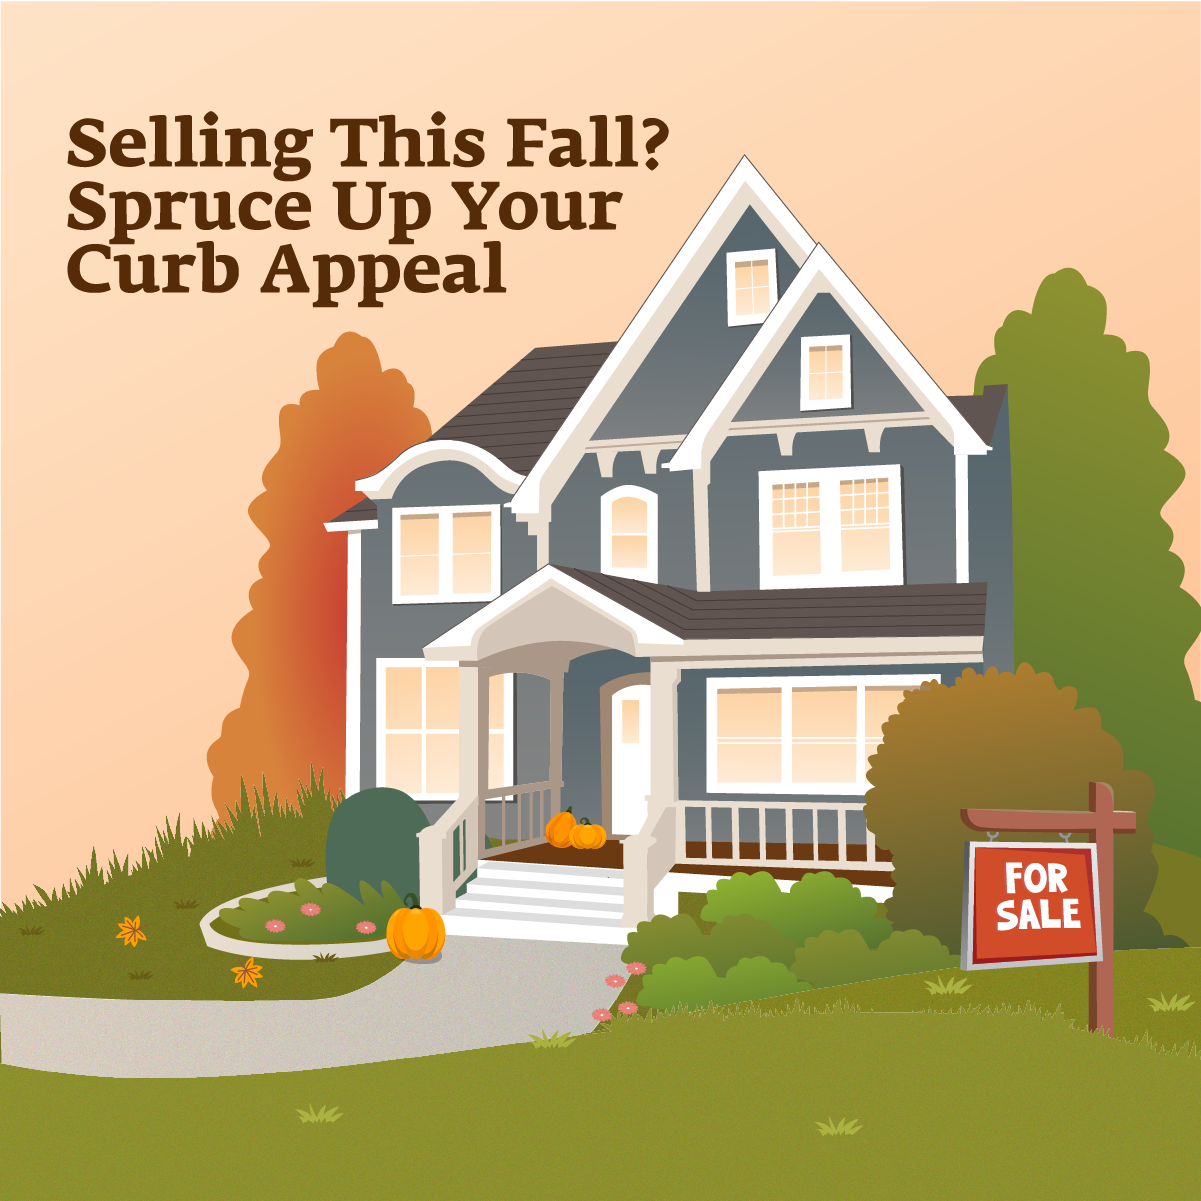 Header: Selling This Fall? Spruce Up Your Curb Appeal